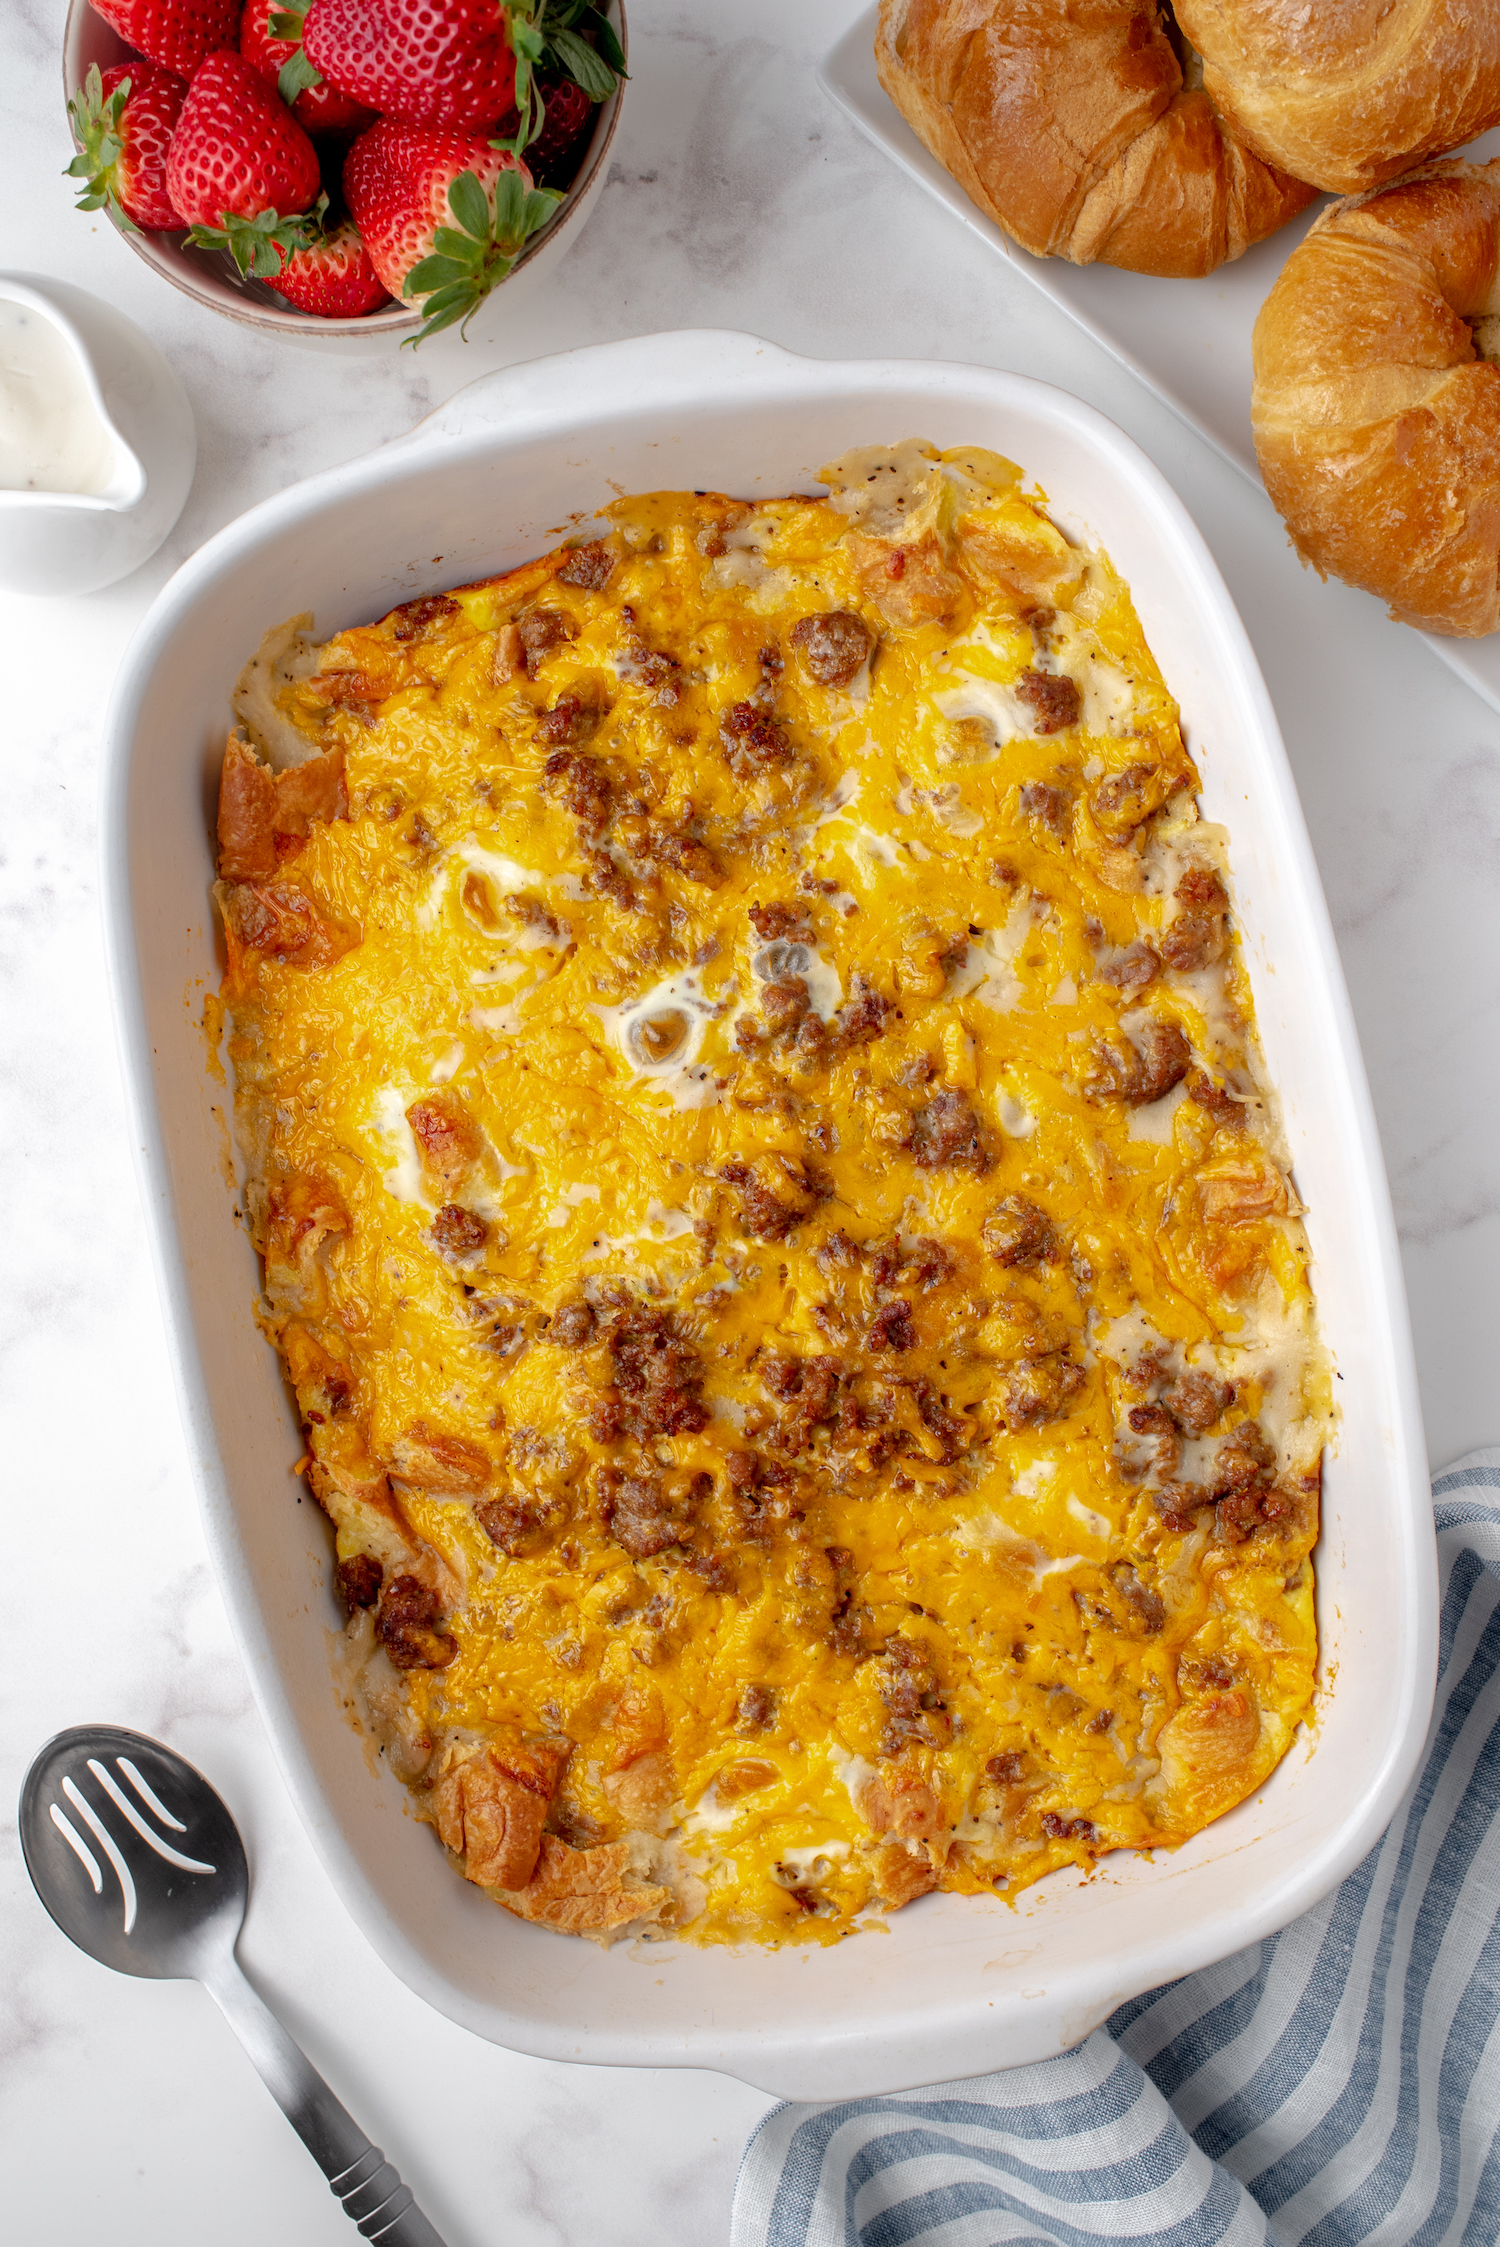 Easy breakfast casserole with sausage gravy, eggs, and croissants